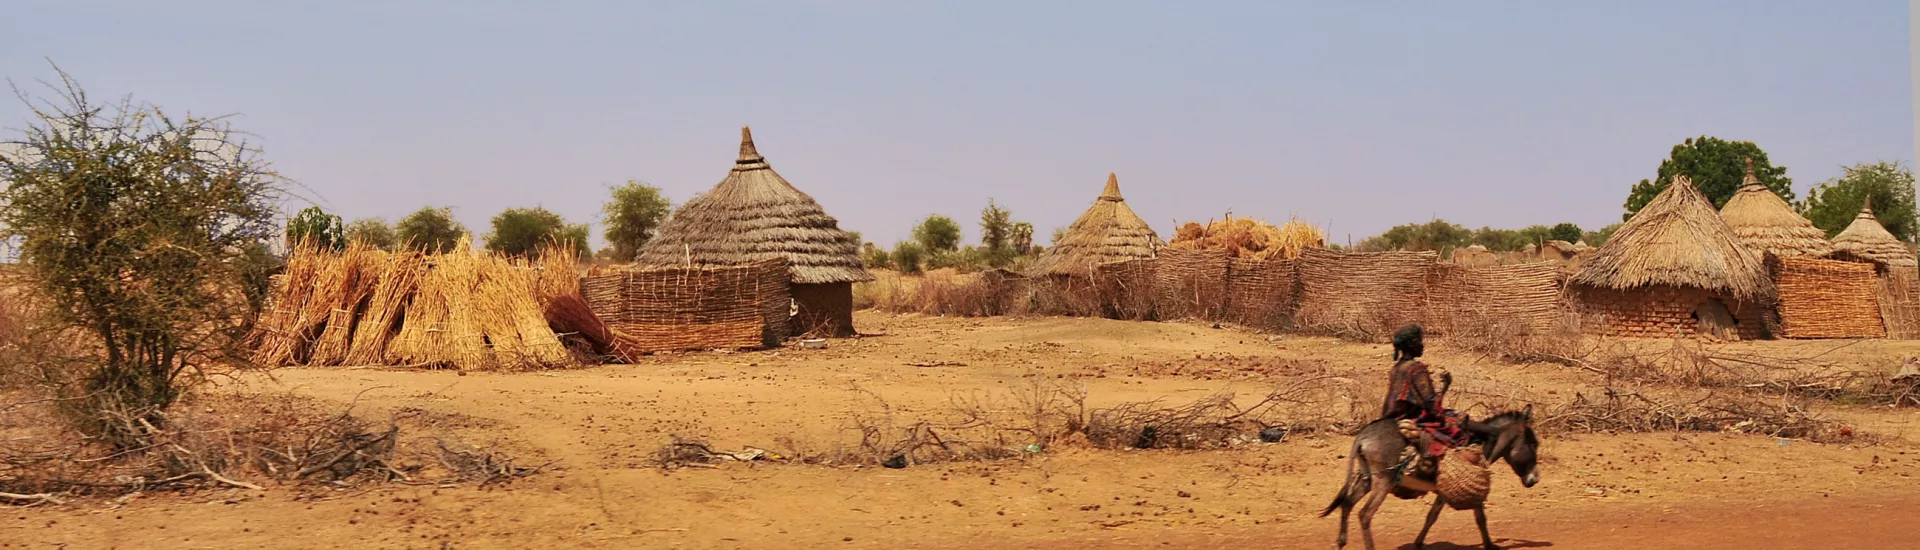 Village in the area of Sahel in Chad